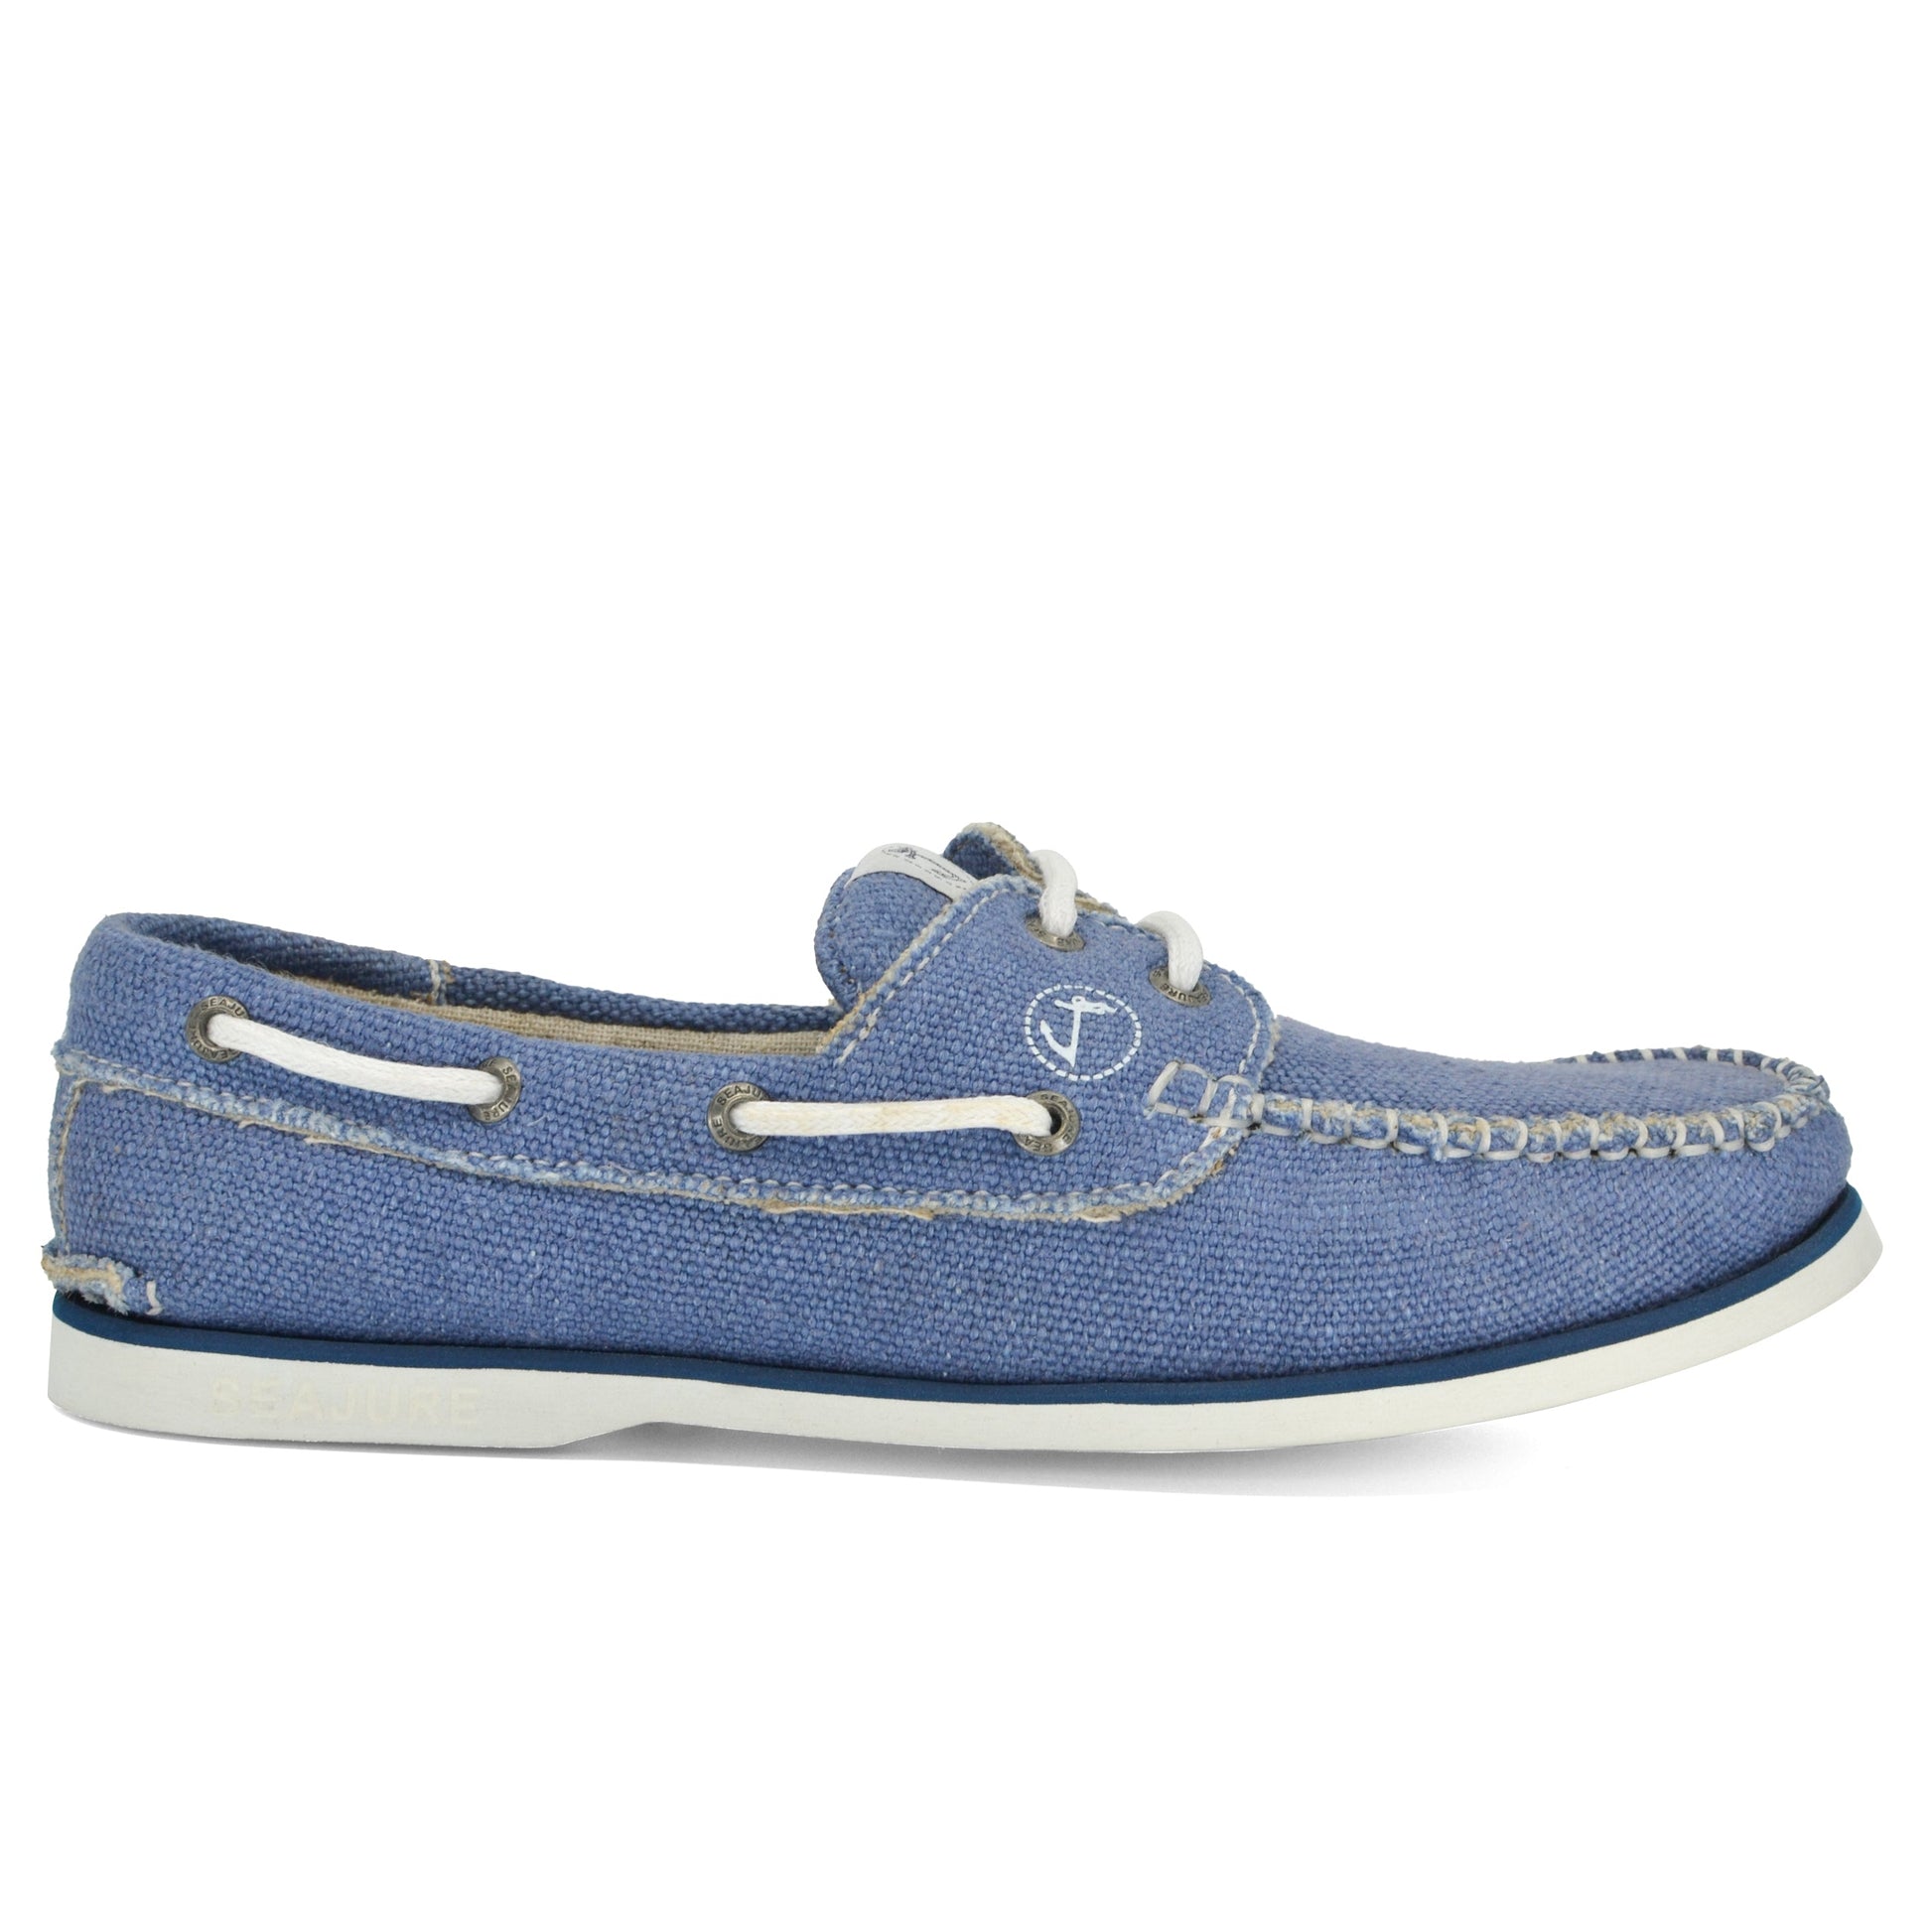 Blue denim Men Hemp & Vegan boat shoe Fidden with white stitching and laces, featuring a natural rubber sole and metal eyelets on a plain background by Amethyst Hestia.